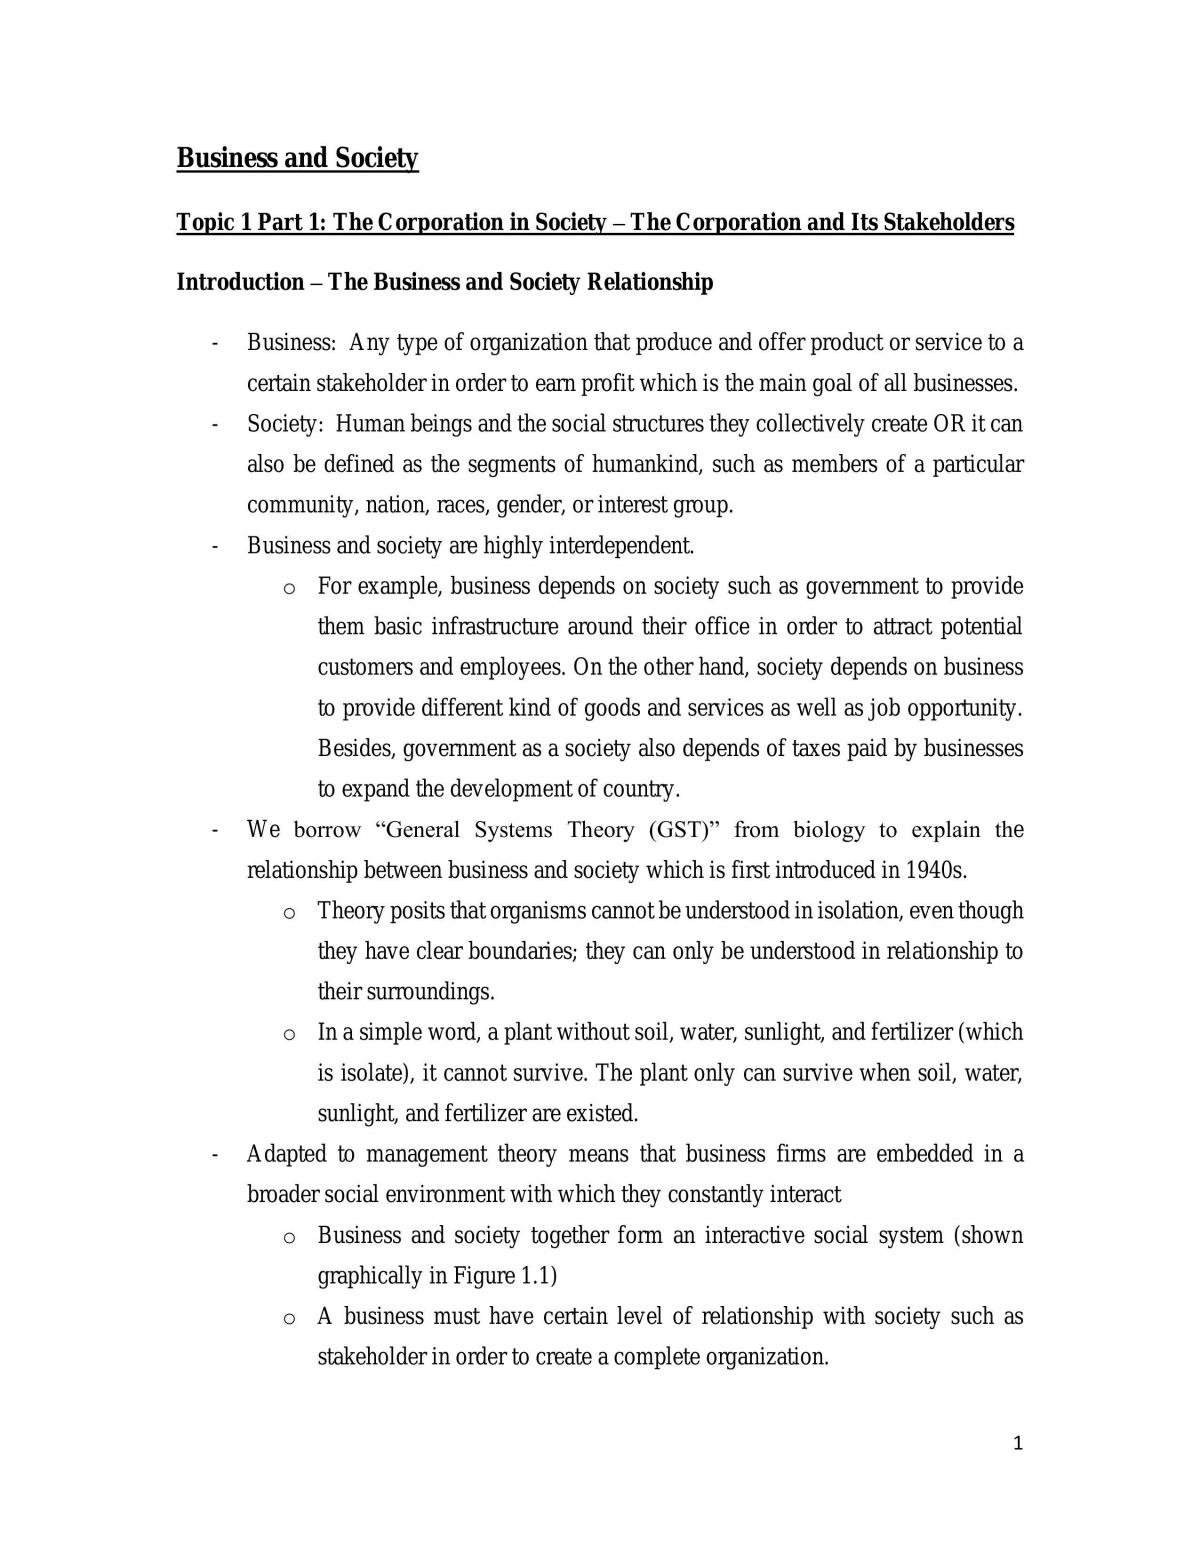 Business and Society Full Notes - Page 1